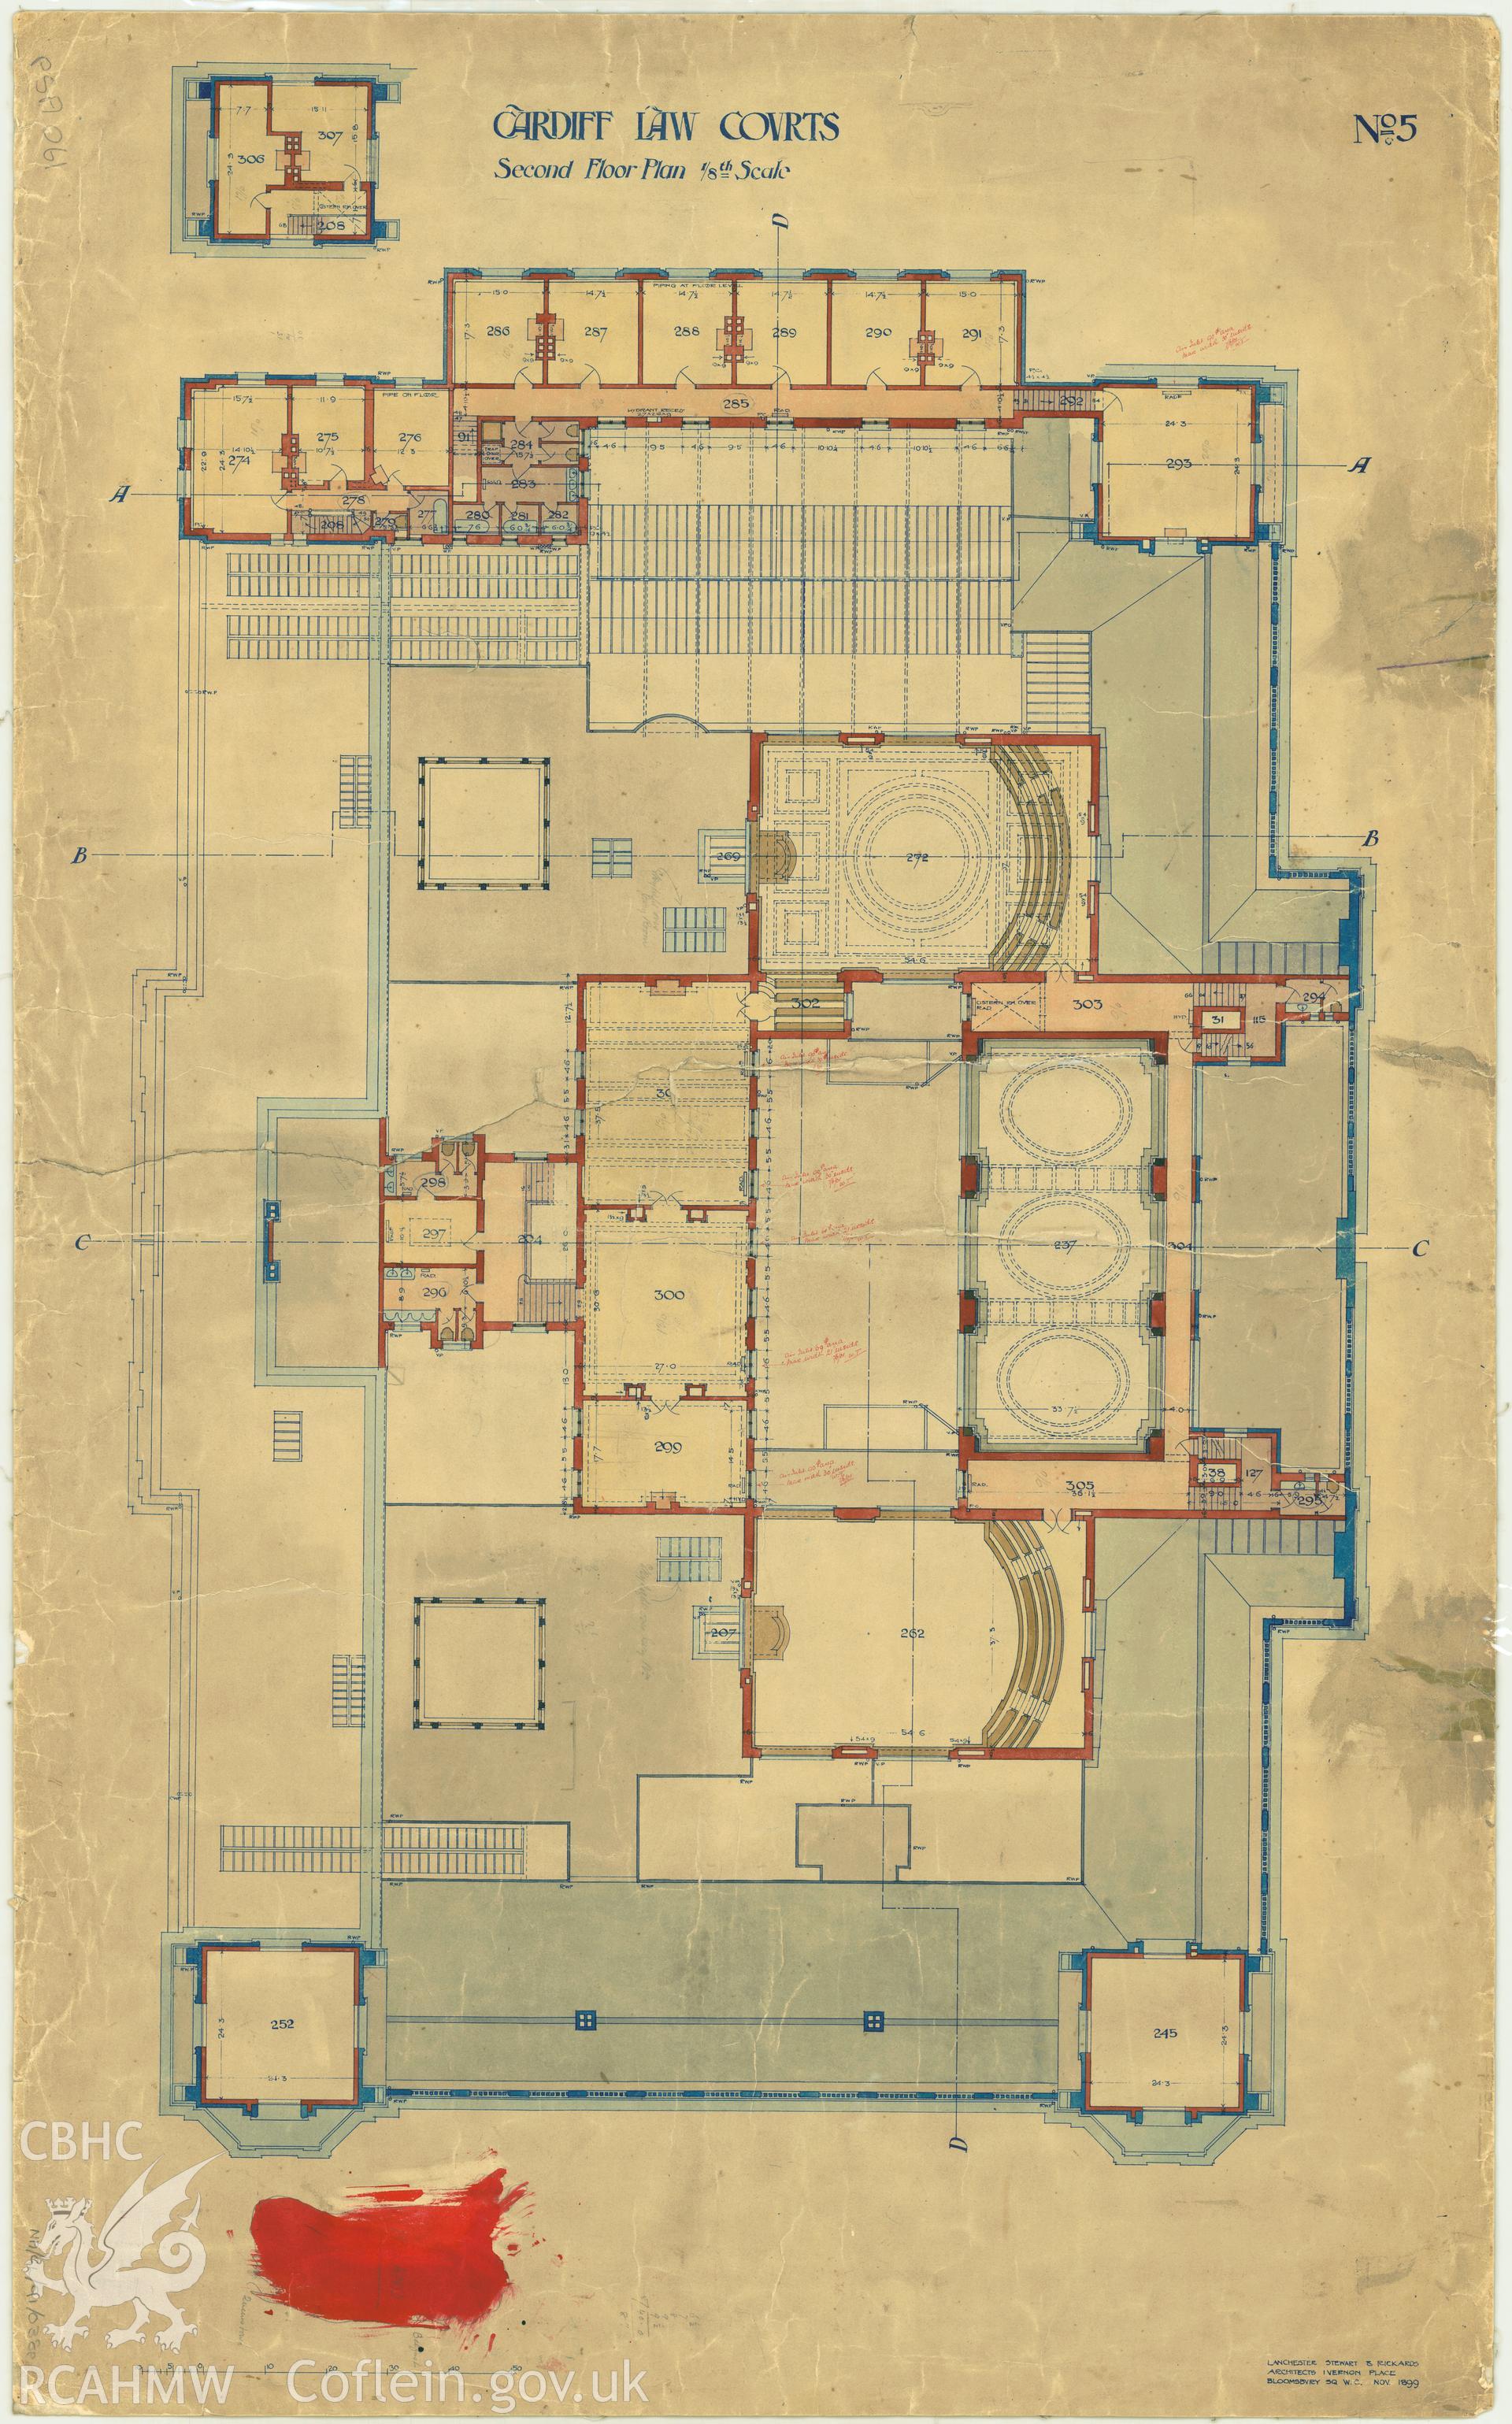 Law Court, Cathays Park, Cardiff; measured drawing showing second floor plan, produced by Lanchester Stewart and Rickards, 1899.